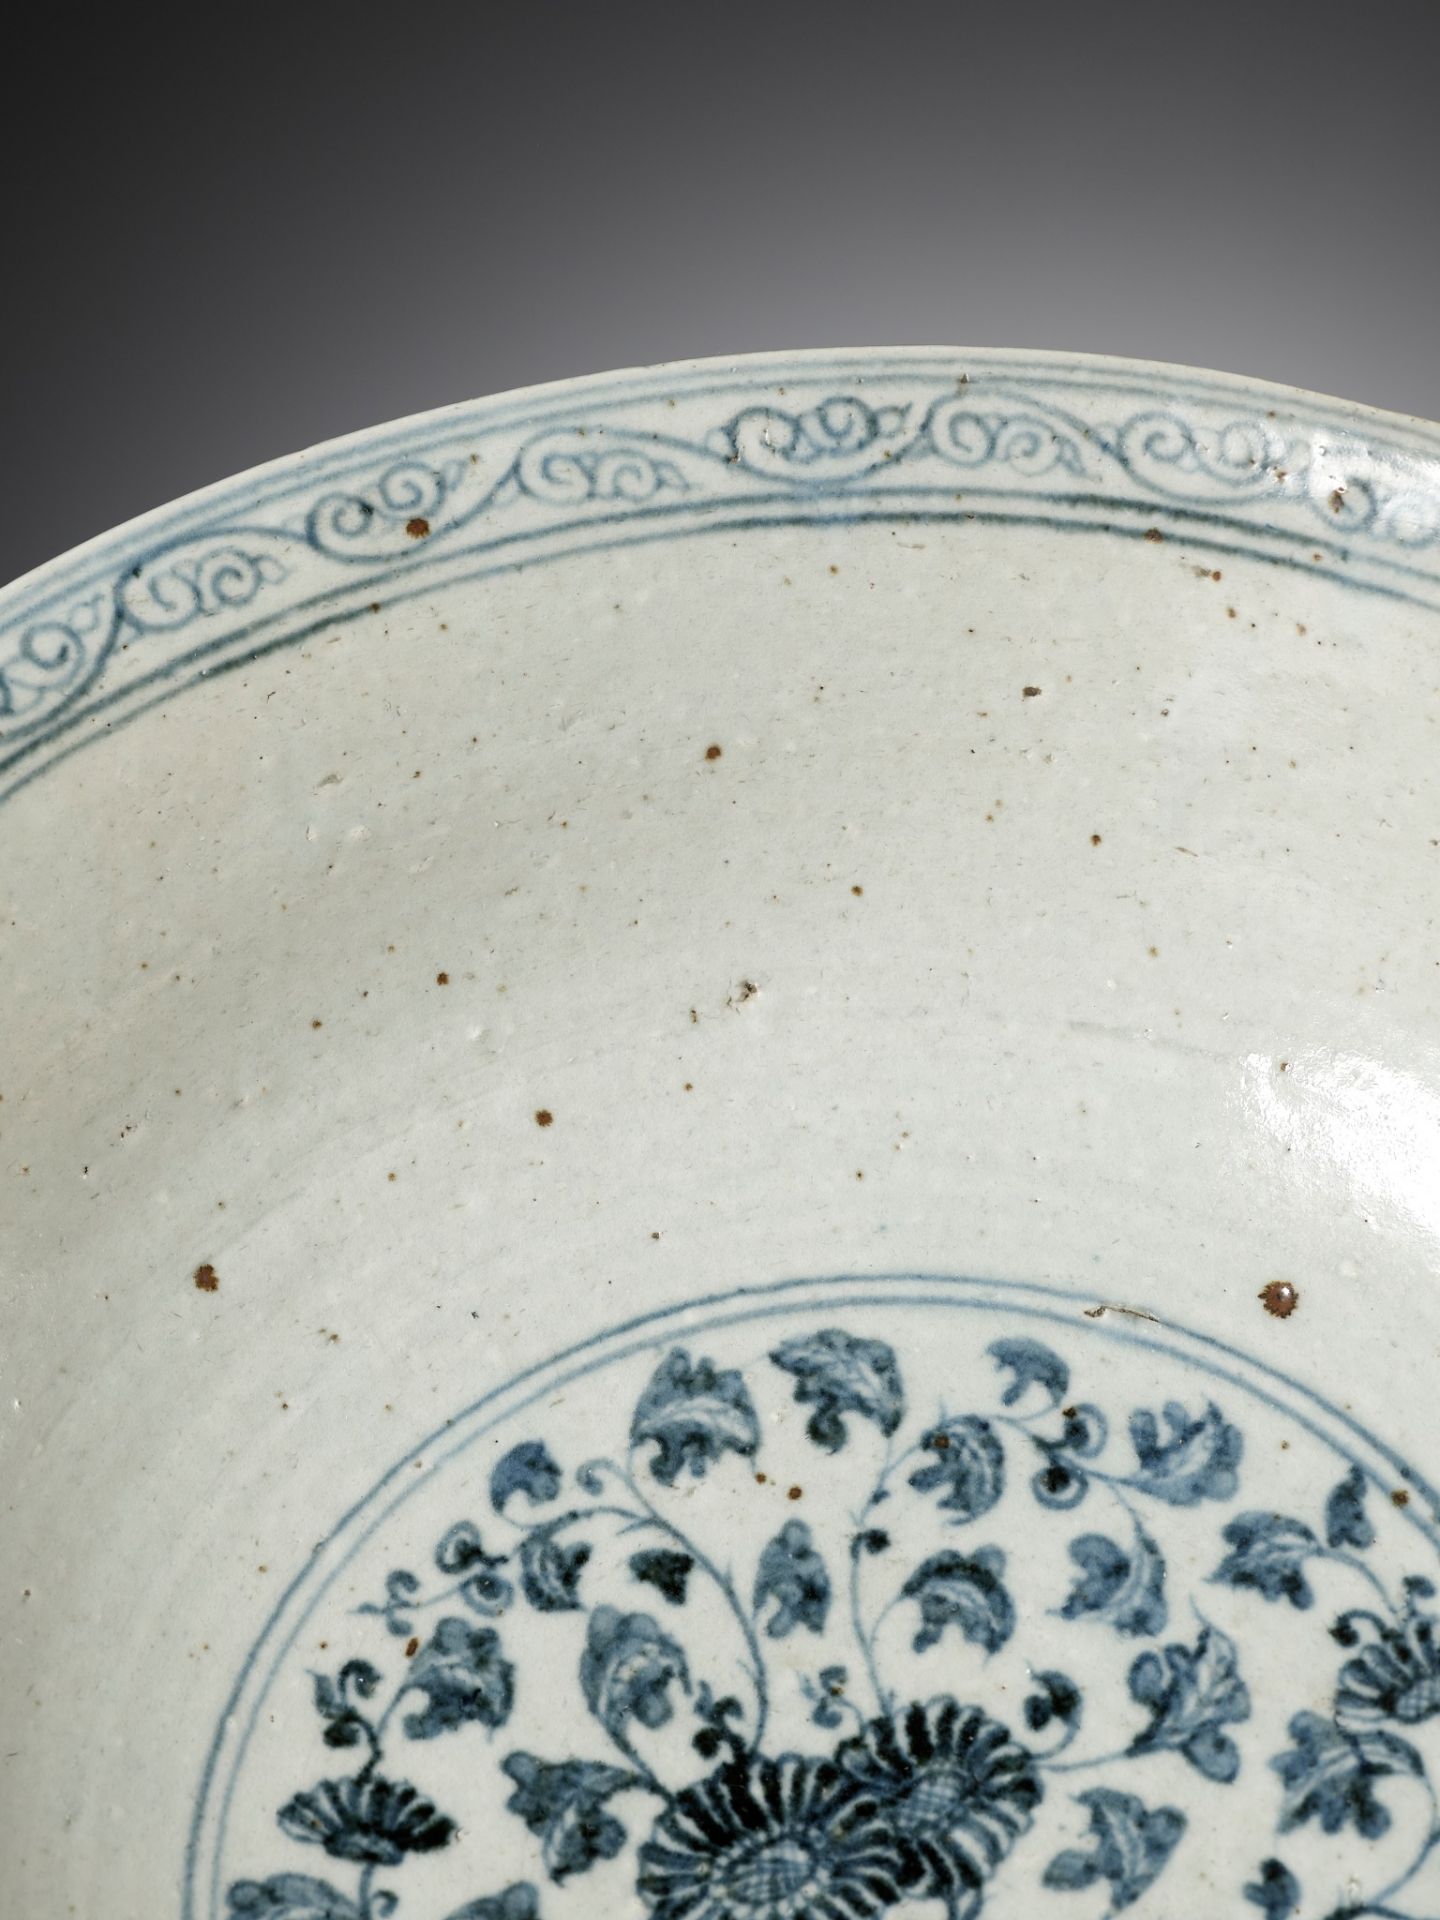 A LARGE ANNAMESE BLUE AND WHITE BOWL, VIETNAM, 14TH-15TH CENTURY - Image 7 of 12